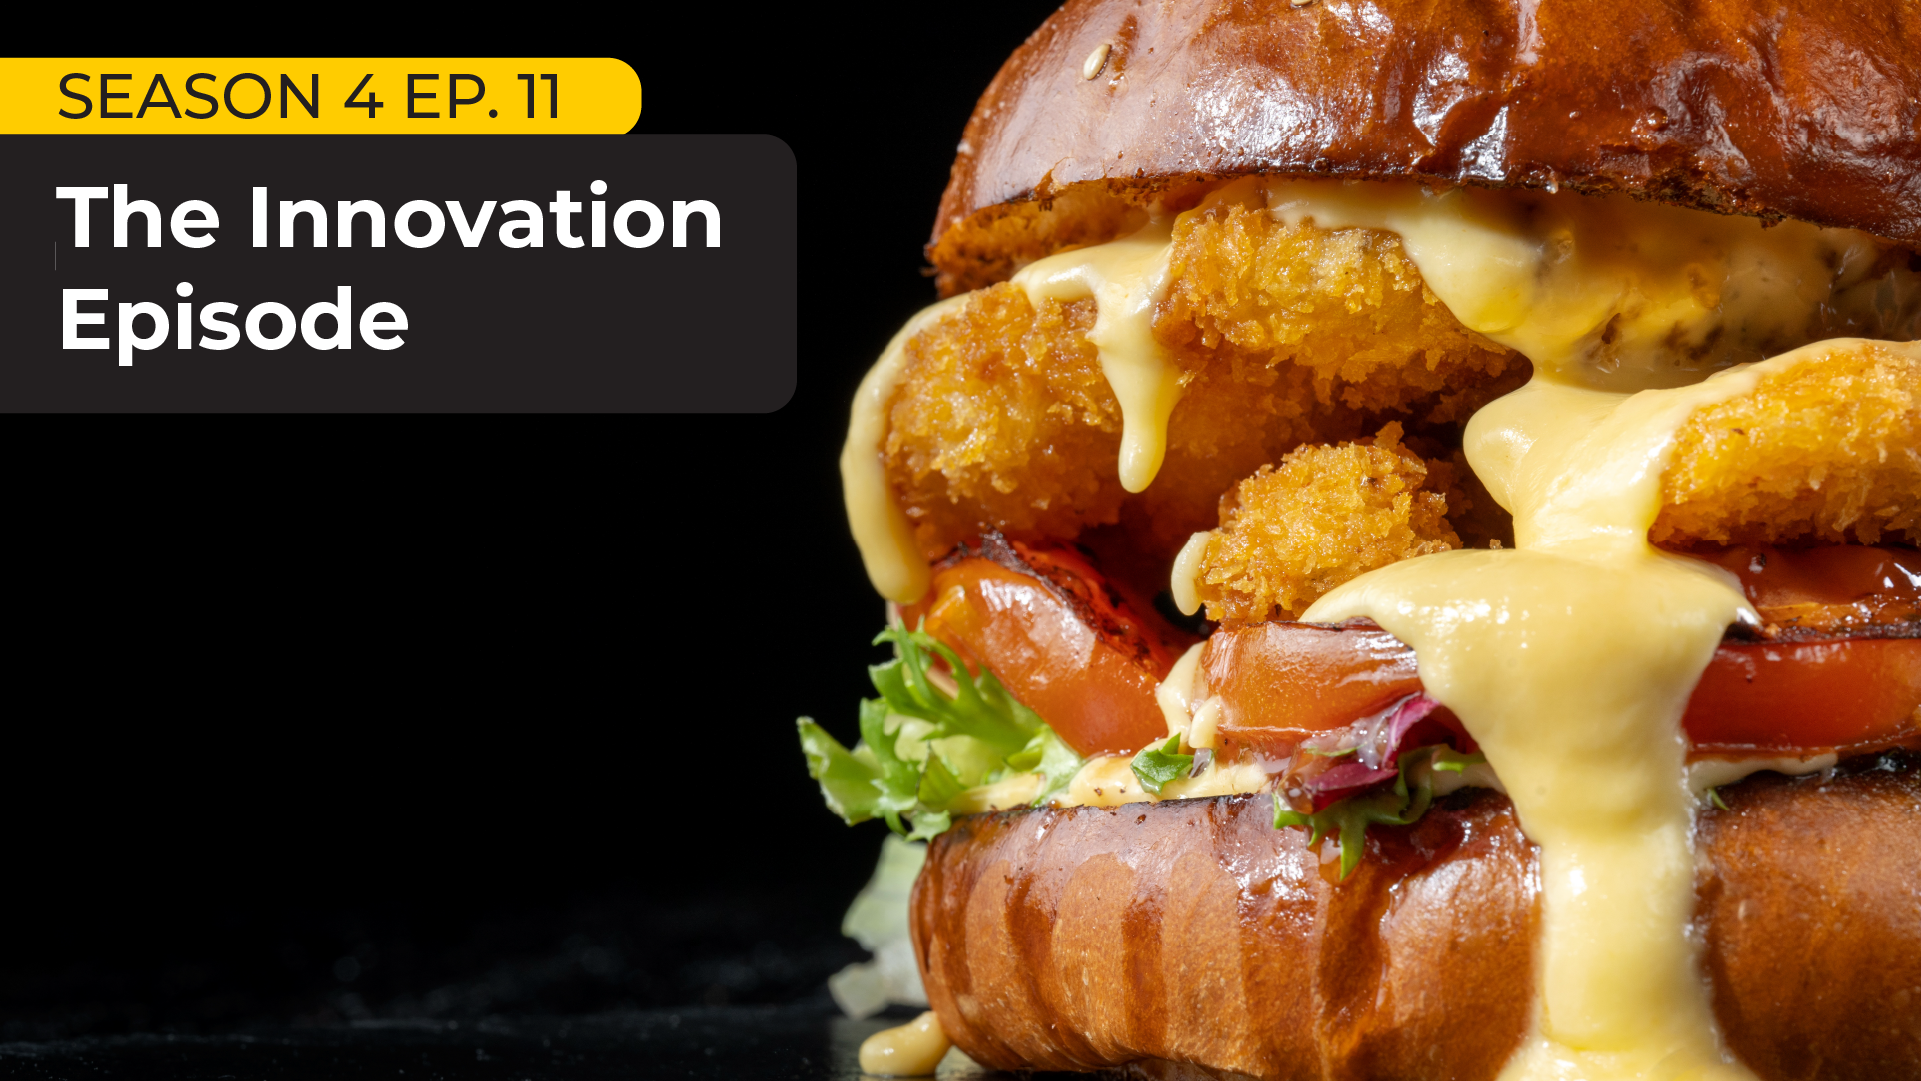 Learn everything you need to know about building a successful innovation pipeline — from emerging food trends to the art of the LTO.